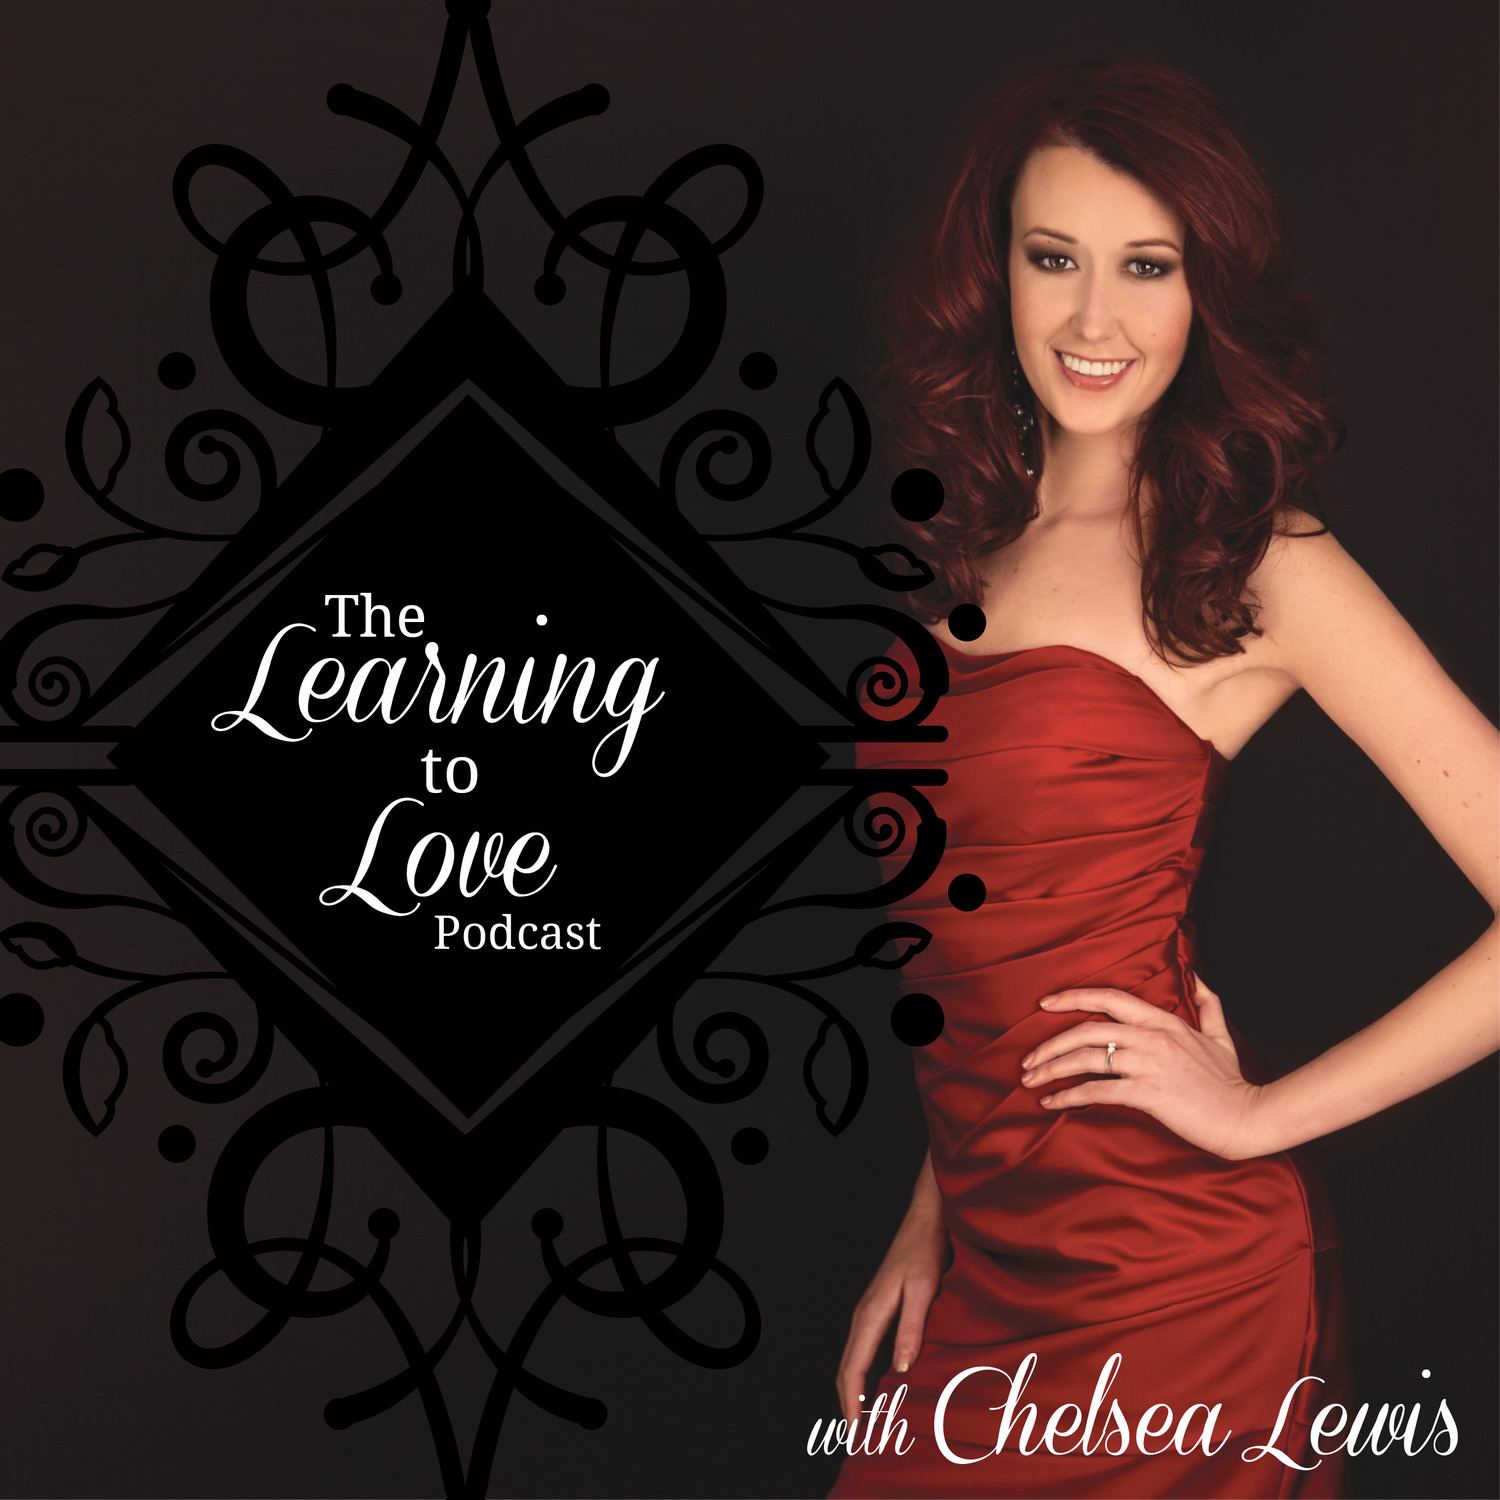 Learning to Love Podcast - Chelsea Lewis Portraits